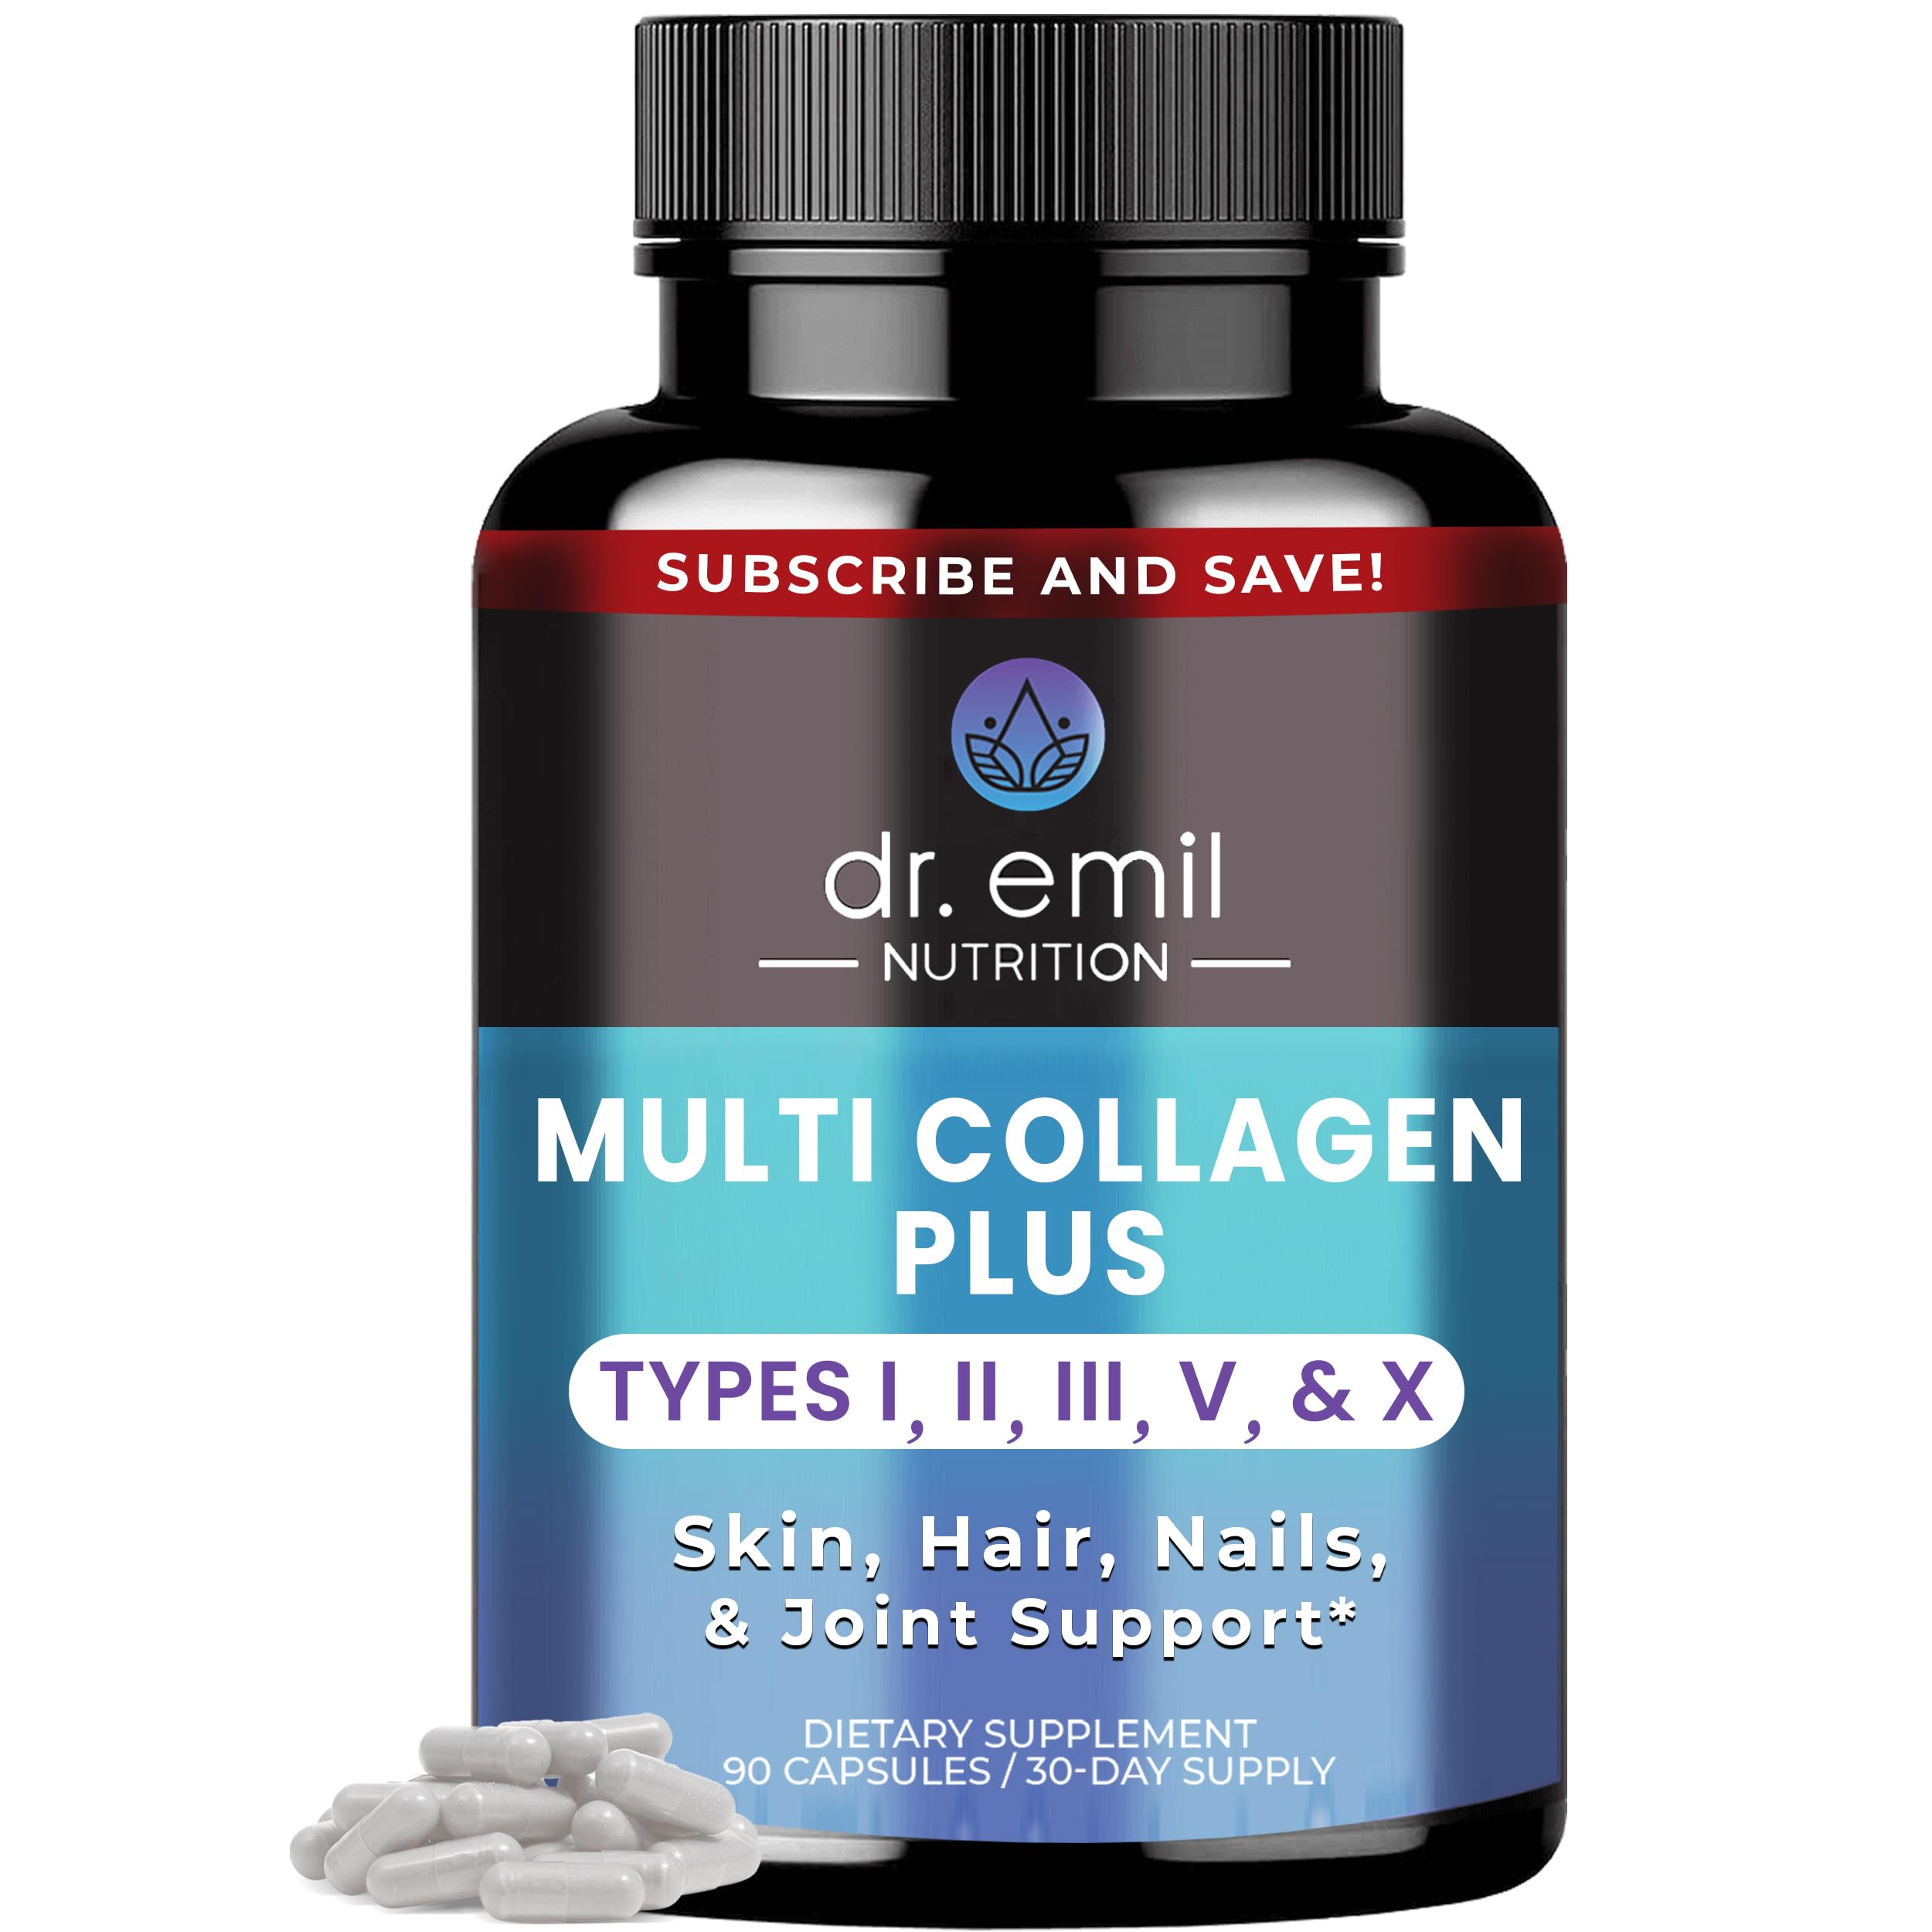 DR EMIL NUTRITION Multi Collagen Pills - 1735mg Collagen Supplements to Support Hair, Skin, Nails, & Joints - Hydrolyzed Collagen Supplements for Women, 30 Servings